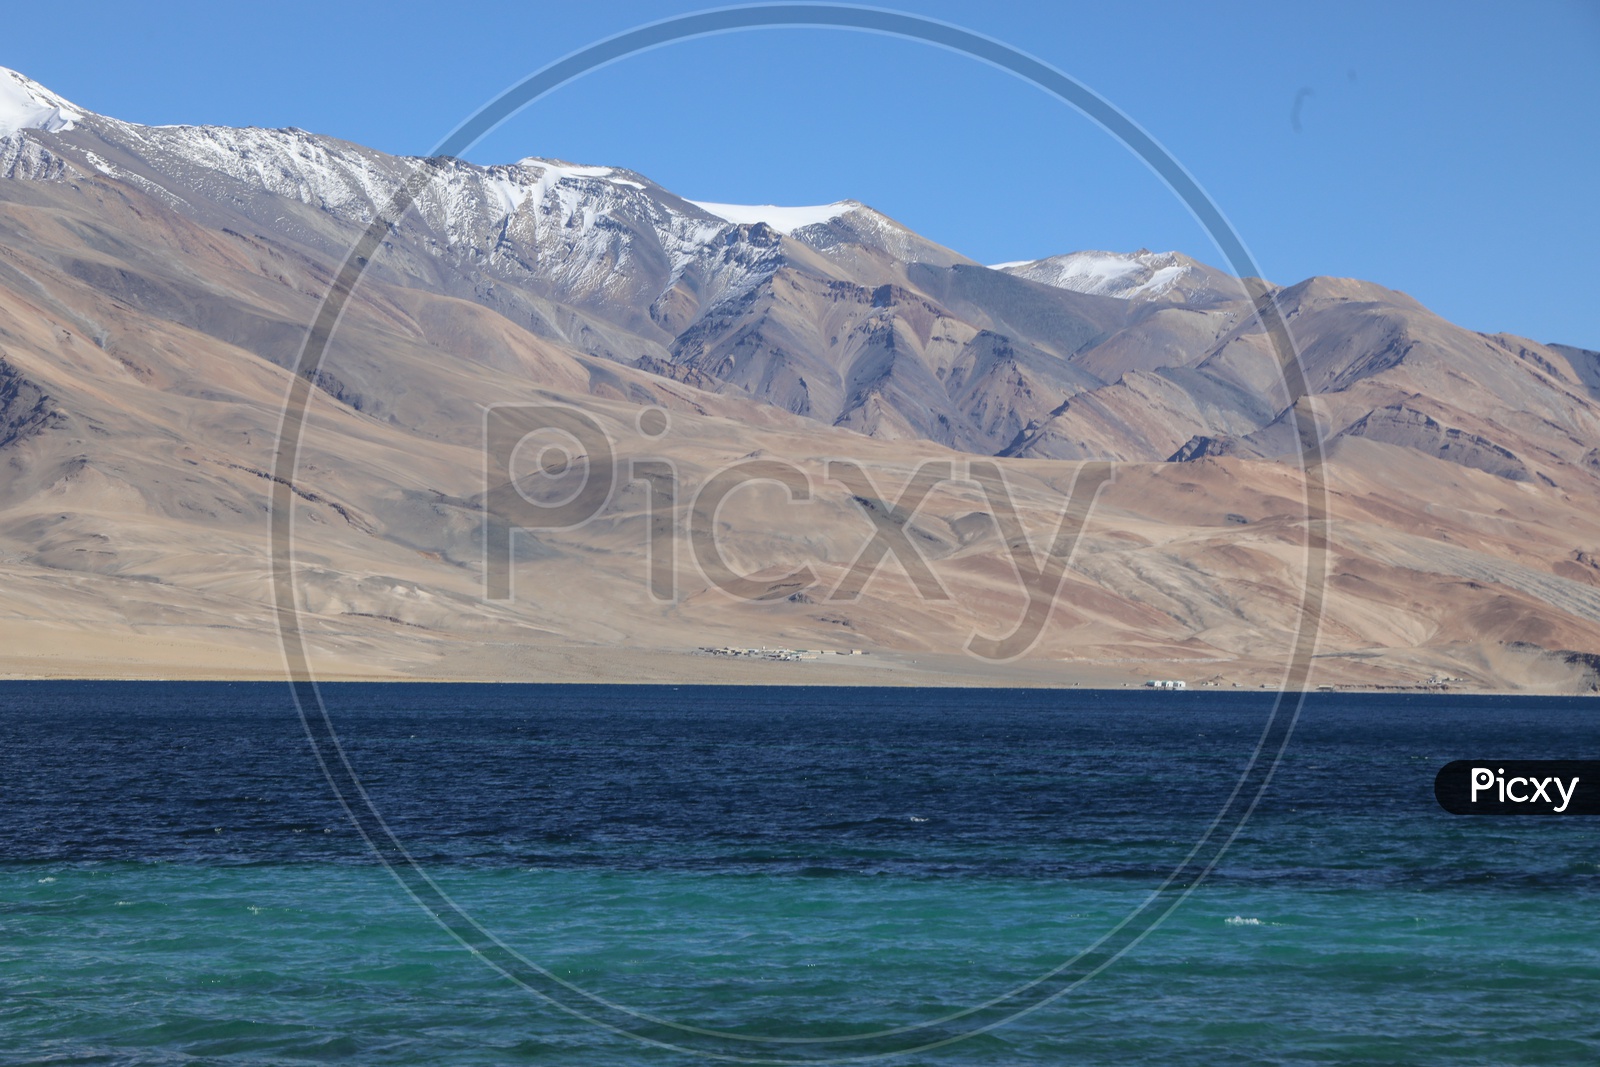 Beautiful Landscape of Snow Capped Mountains of Leh with tsomoriri lake in the foreground